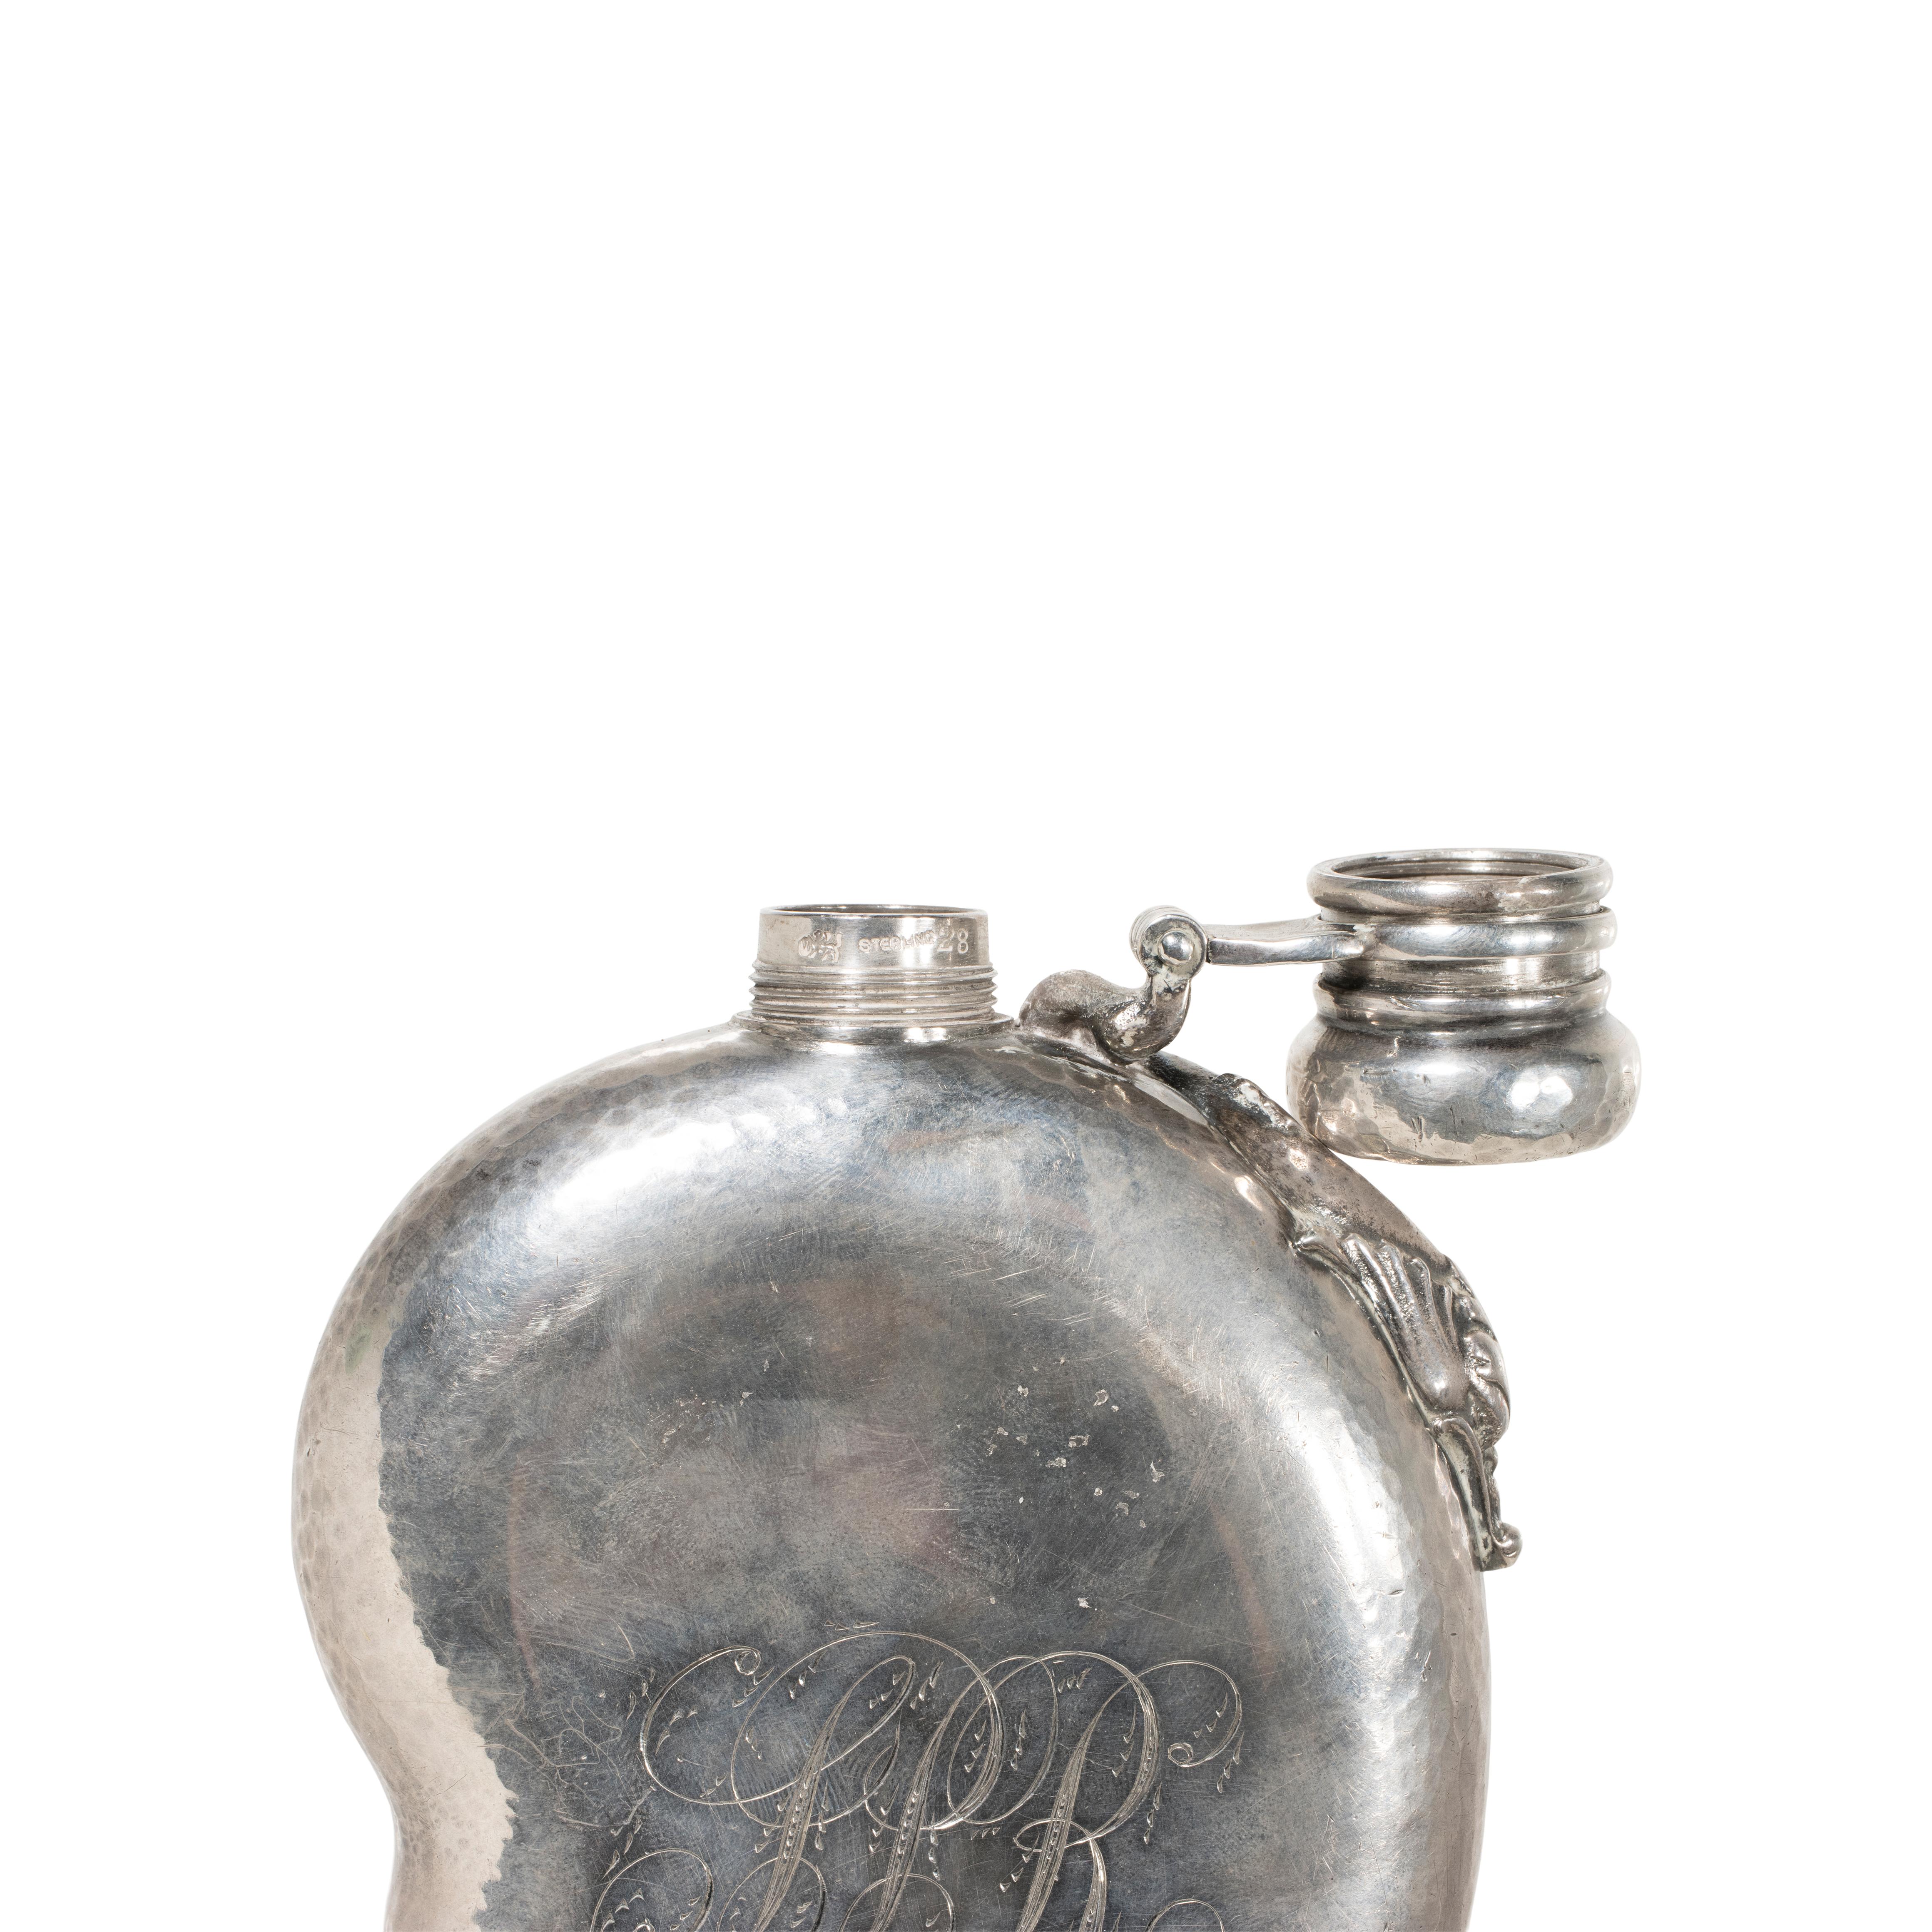 Whiting sterling silver flask. Woman in a wave on front, dolphin near hinge, monogrammed with date on back, and hammered on sides and cap. 6 1/4